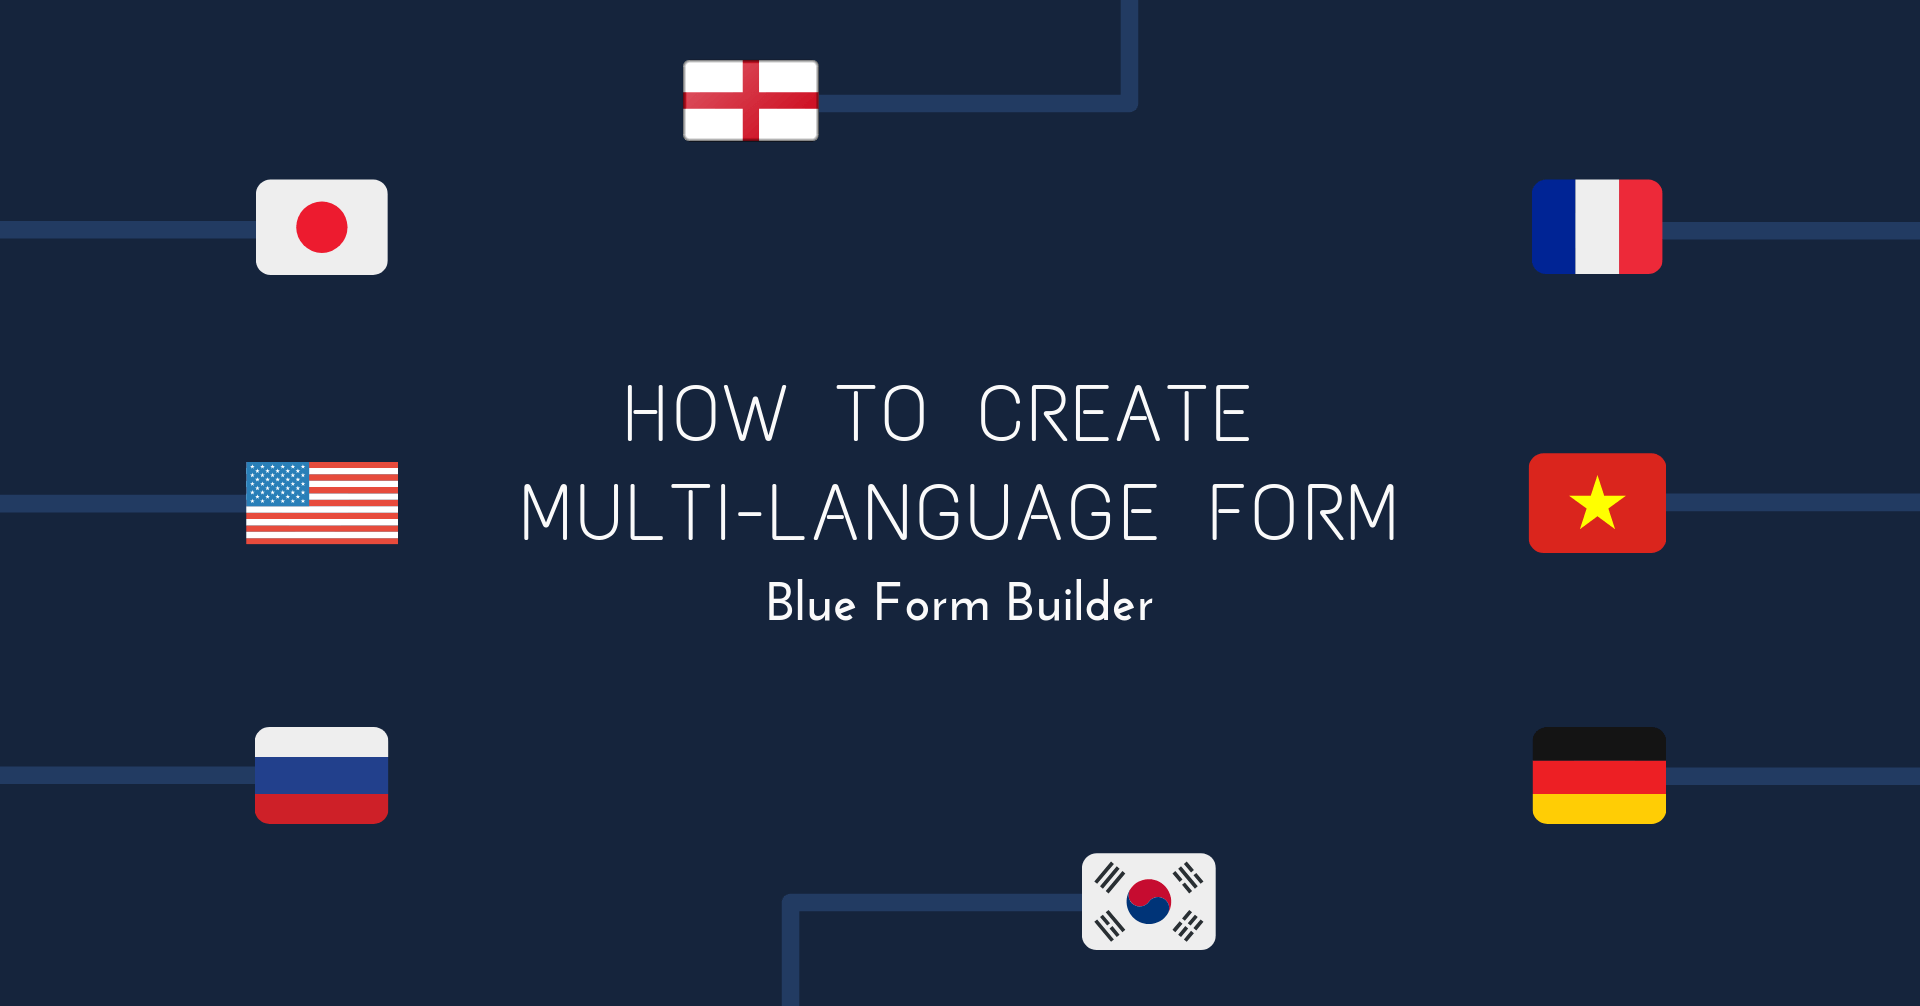 How to create multi-language forms with Blue Form Builder?